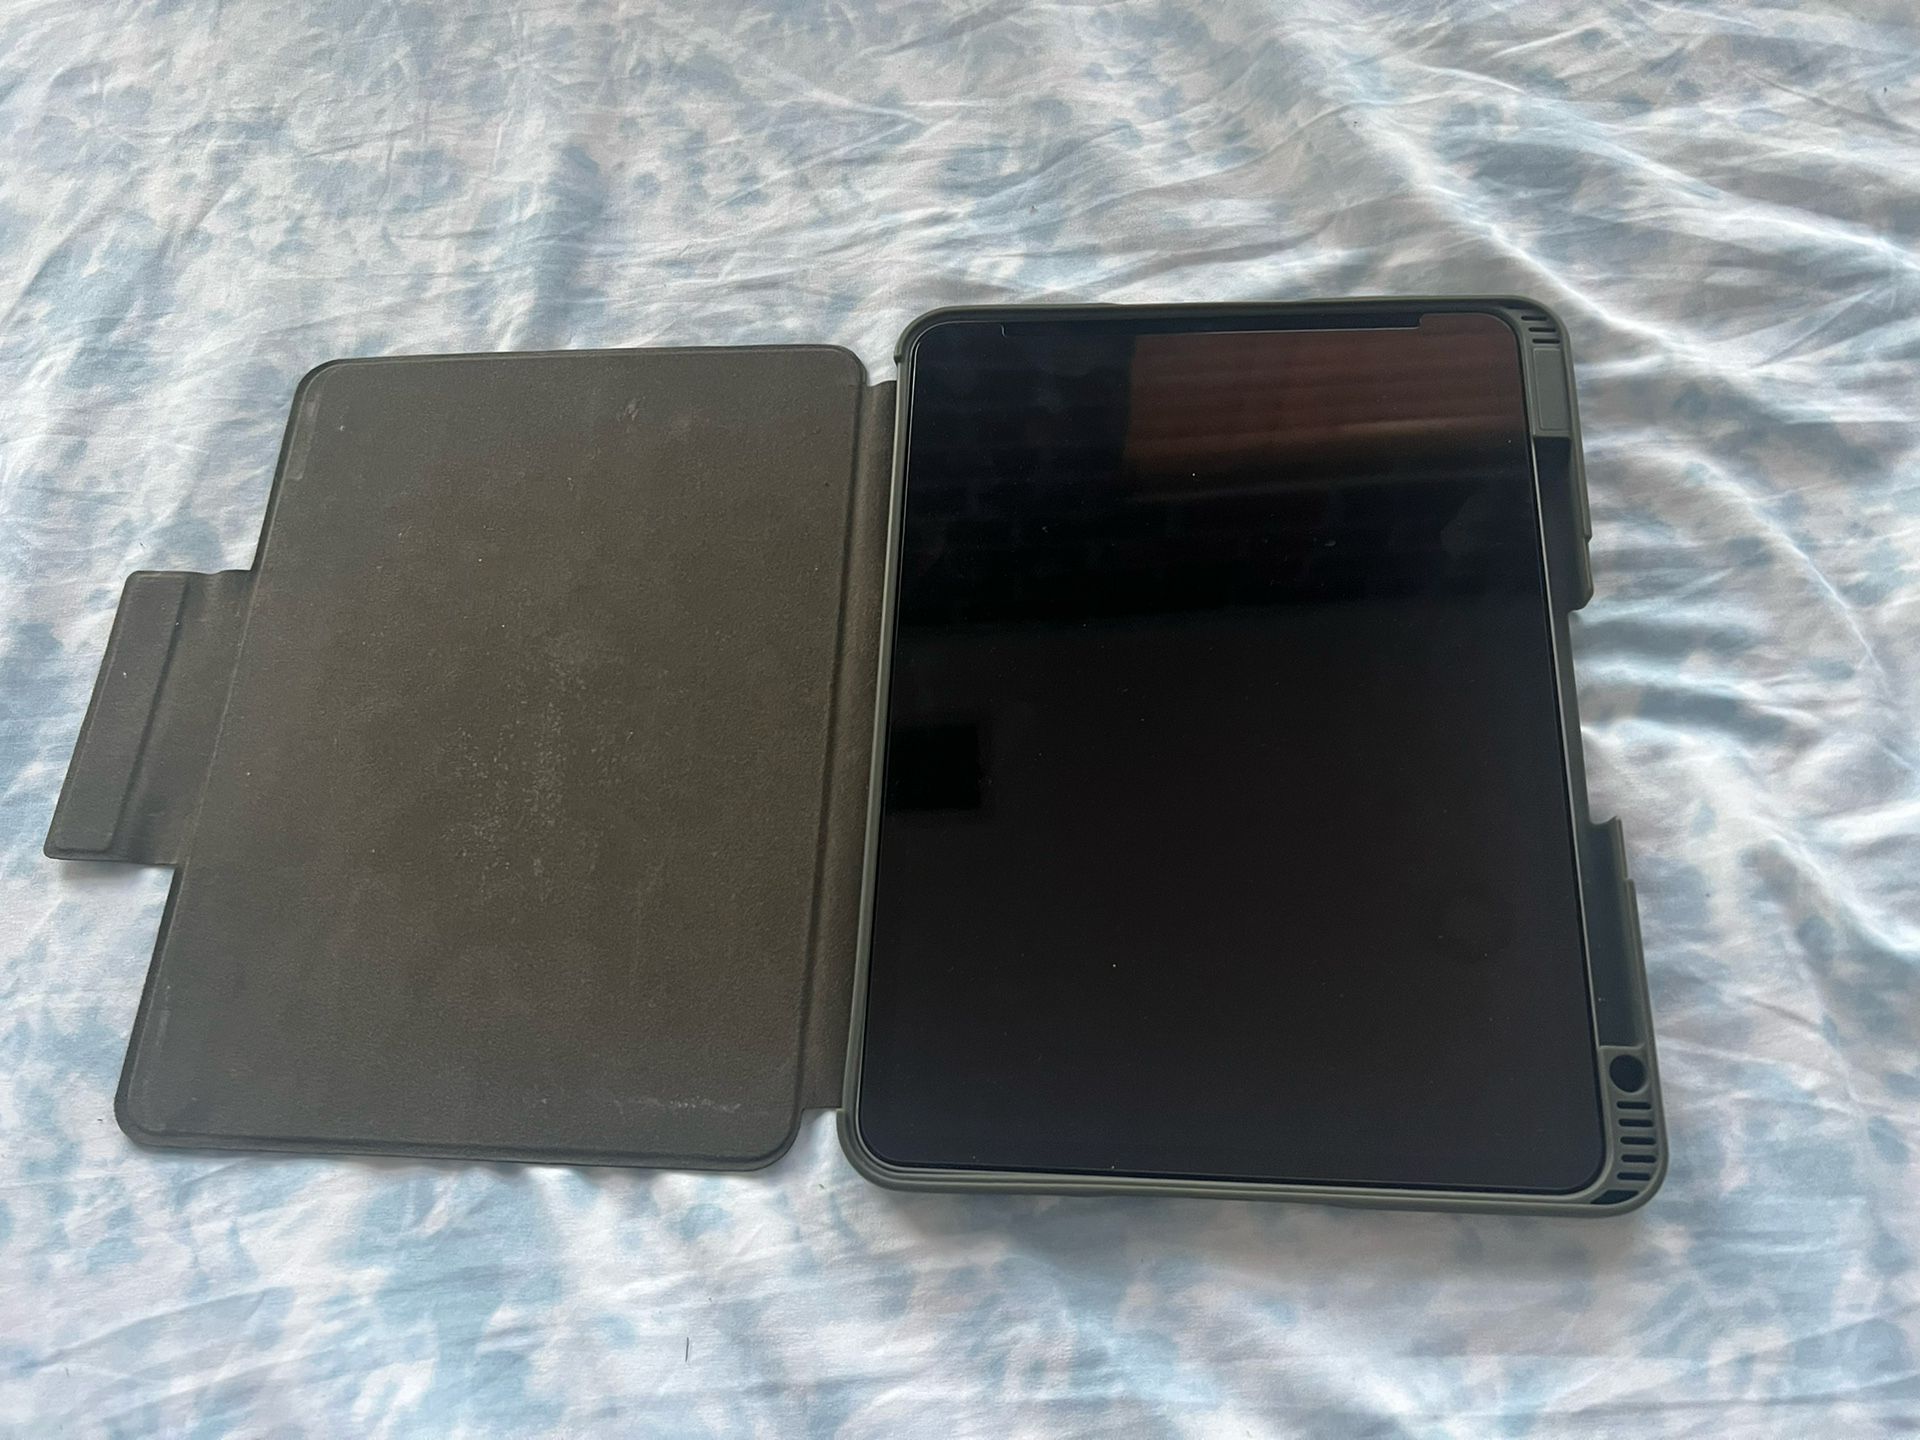 iPad Pro 11 Inch 4th Generation With Cellular